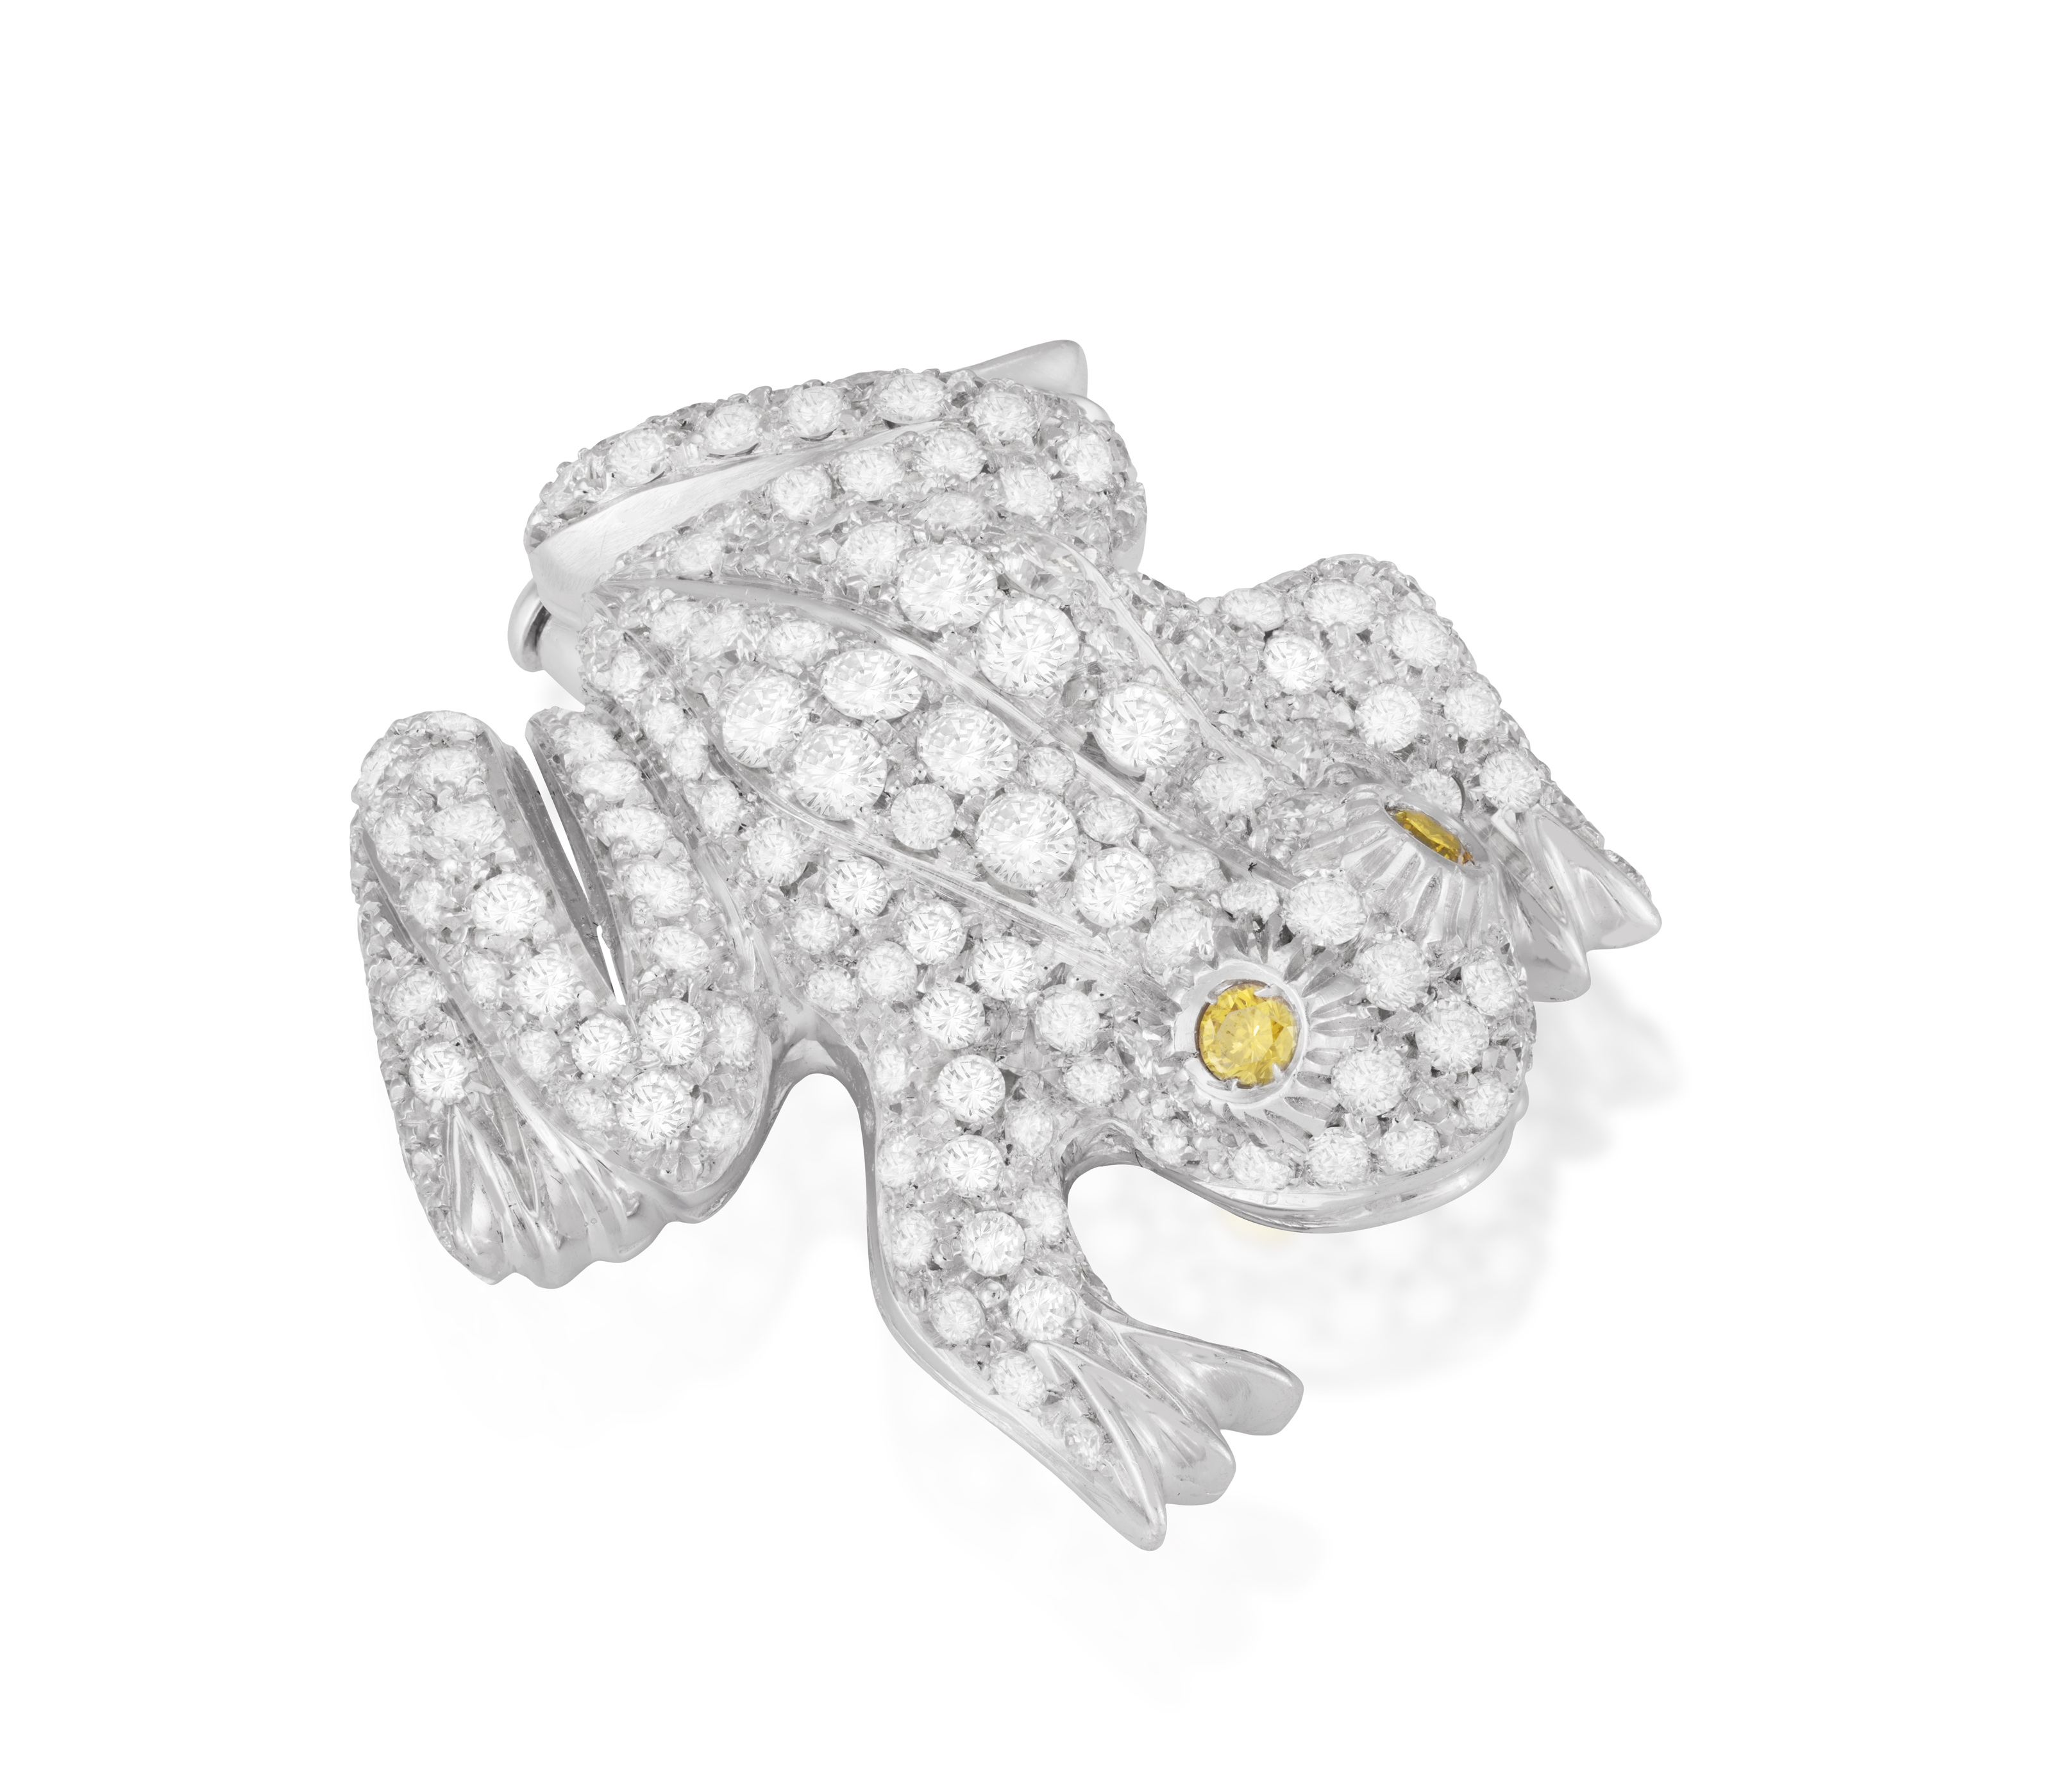 A DIAMOND FROG BROOCH The body pavé-set with brilliant-cut diamonds, the eyes set with brilliant-cut - Image 2 of 5